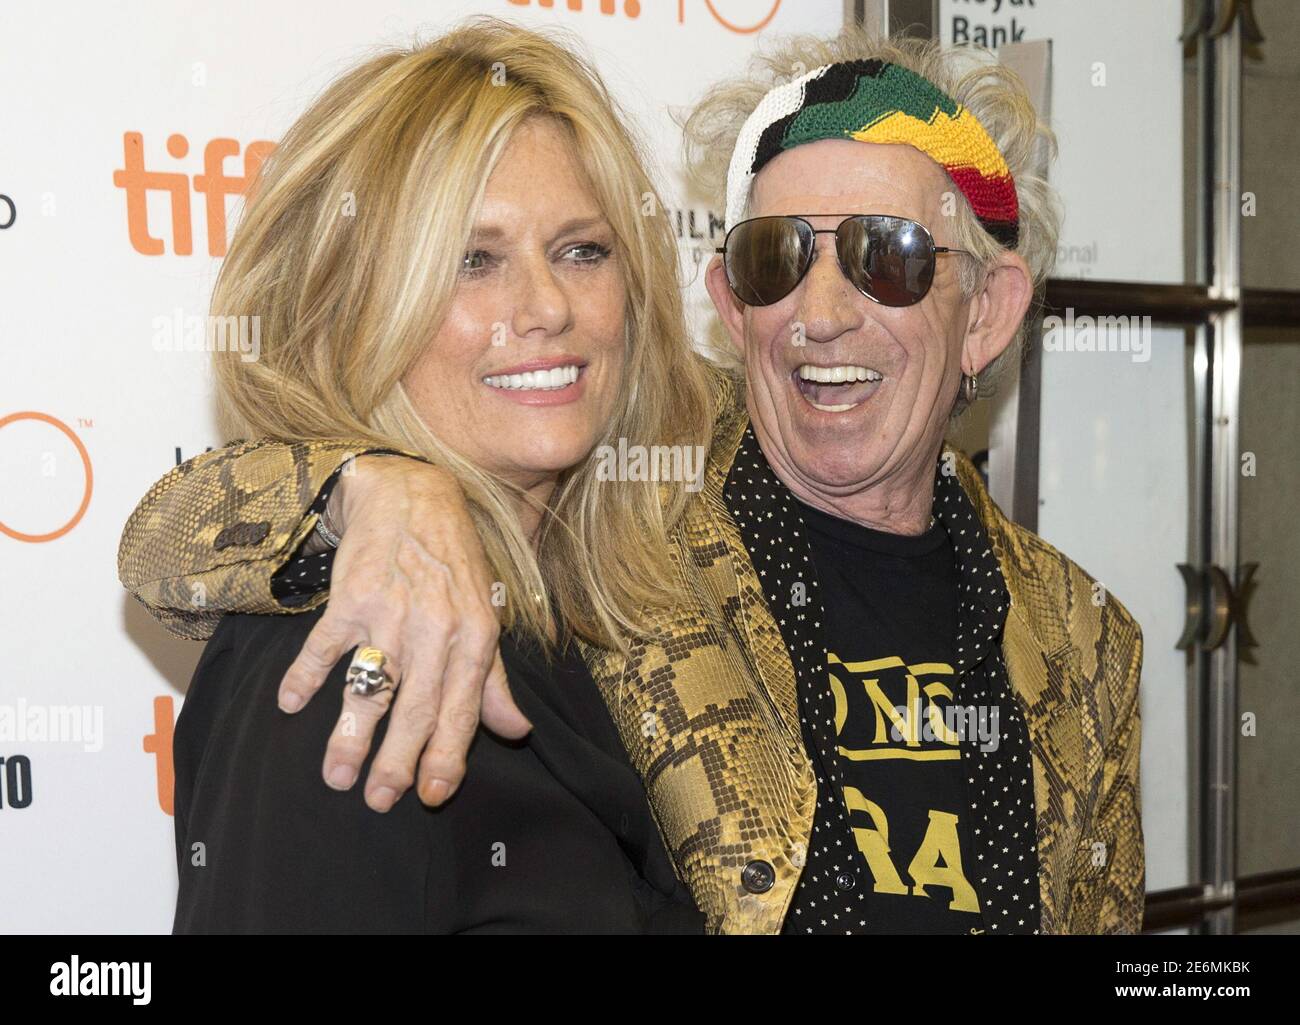 Rolling Stones guitarist Keith Richards arrives with his wife Patti Hansen  on the red carpet for the film "Keith Richards: Under the Influence" during  the 40th Toronto International Film Festival in Toronto,